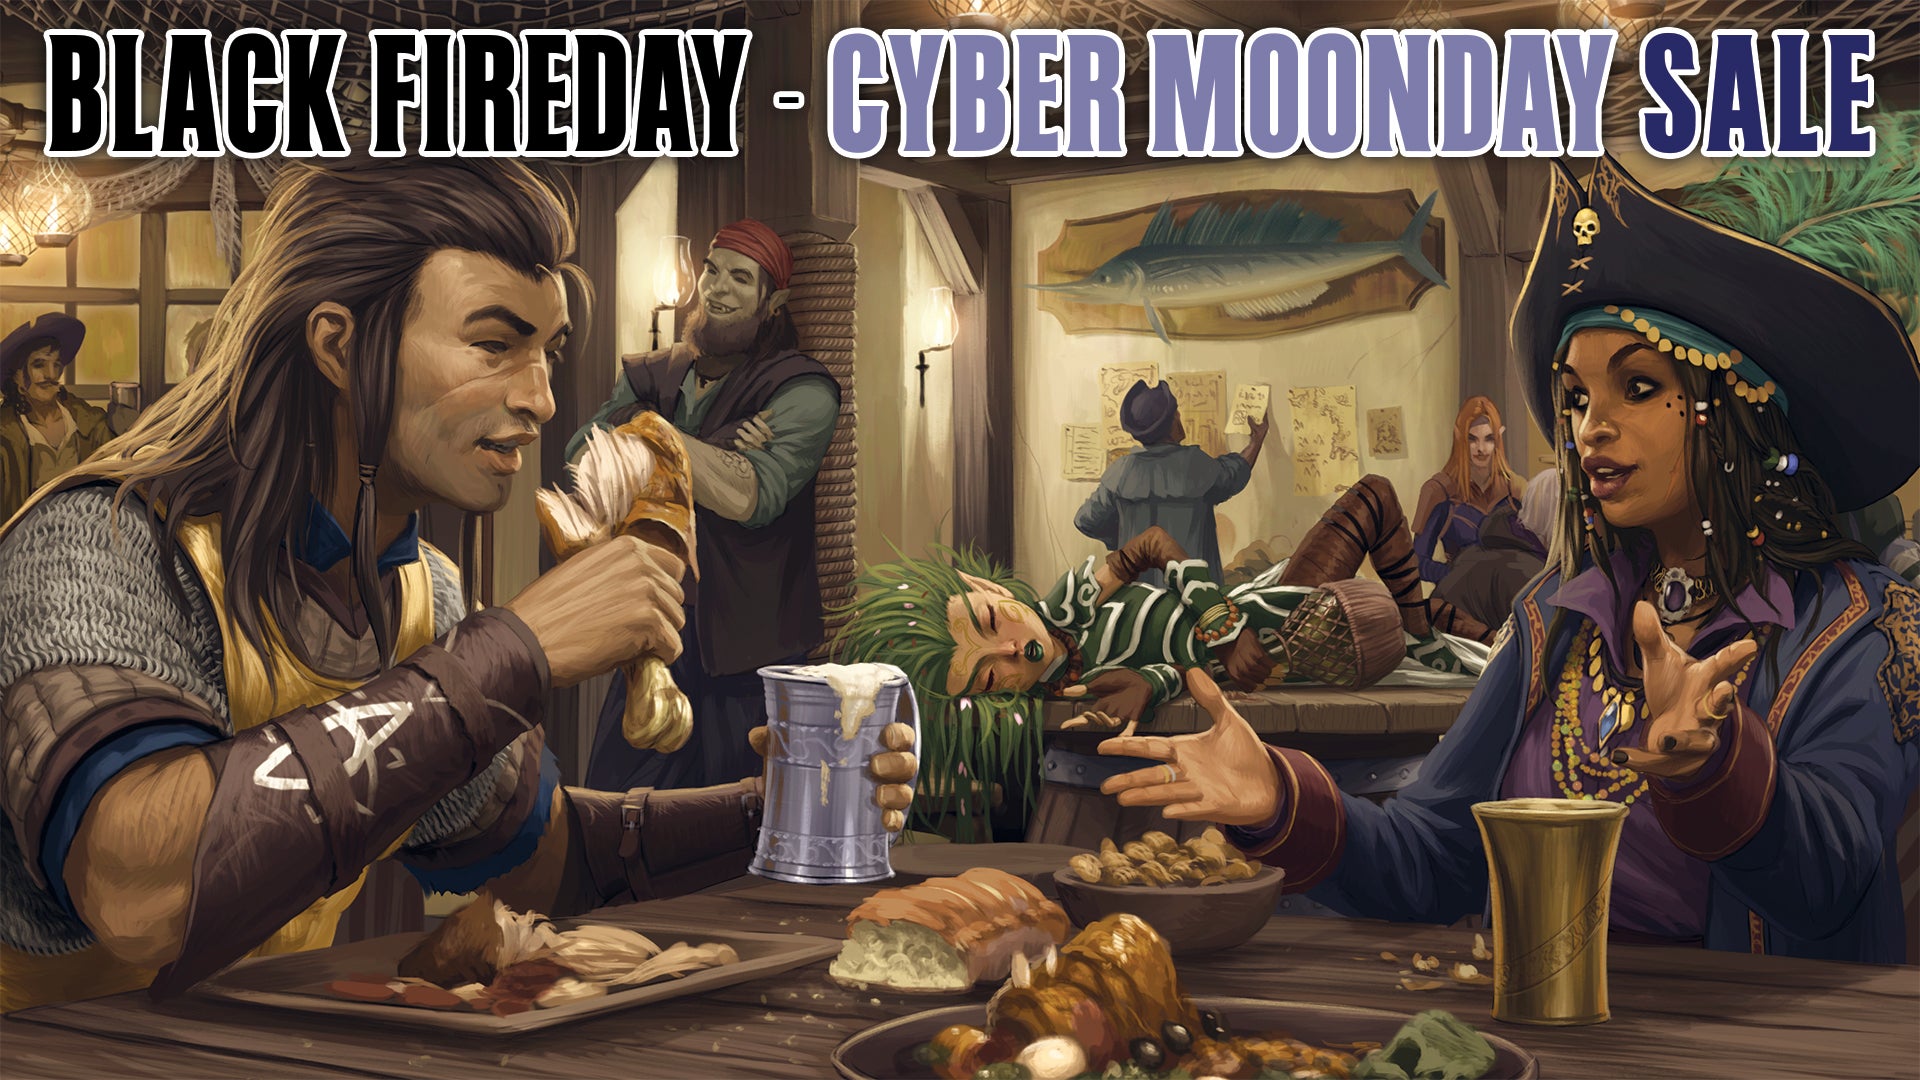 Black Fireday through Cyber Moonday Sale : background art by Roberto Pitturru. Iconic fighter, Valeros, enjoys a meal with a friendly pirate in a tavern